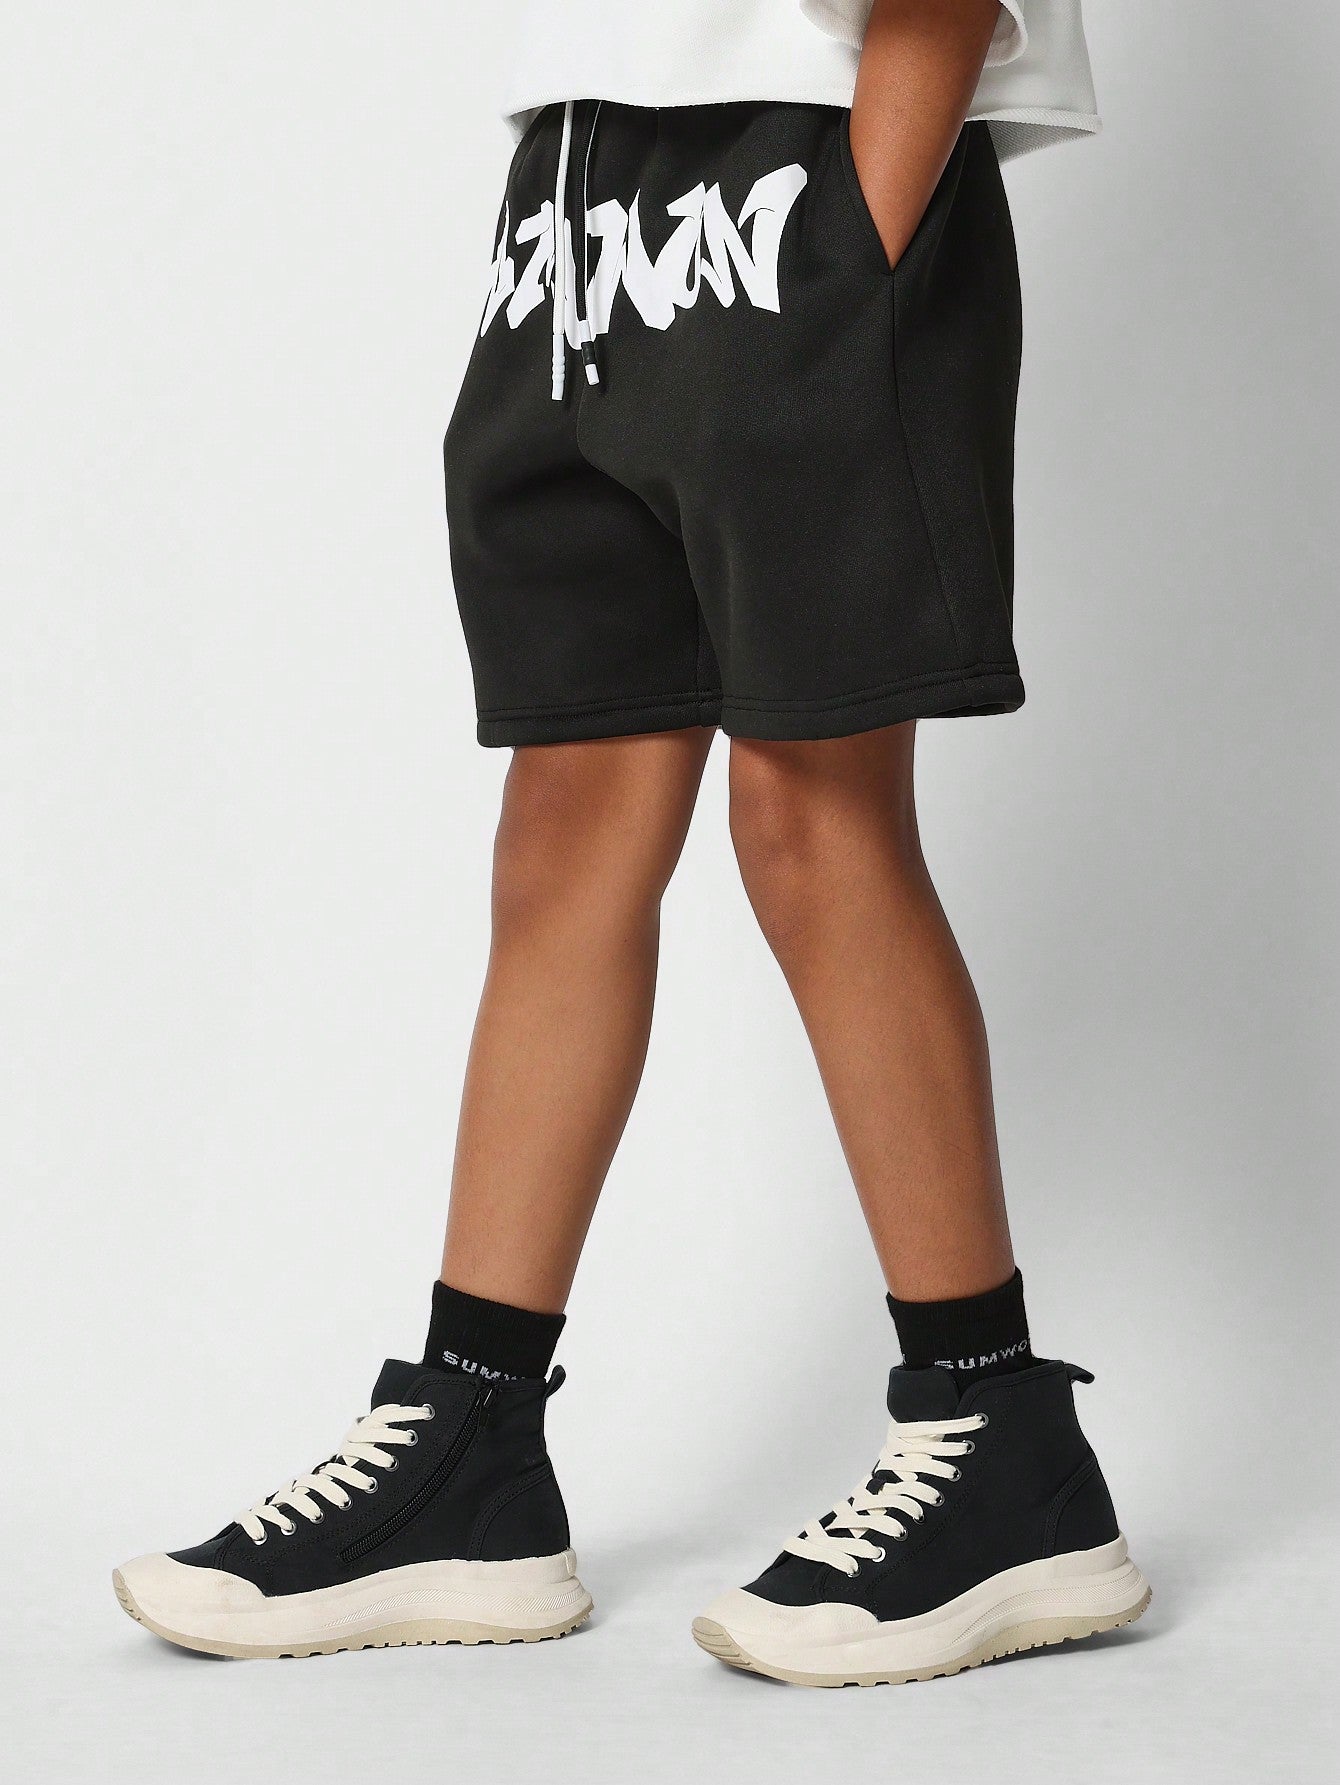 Tween Girls Drop Crotch Short With Front Print Back To School